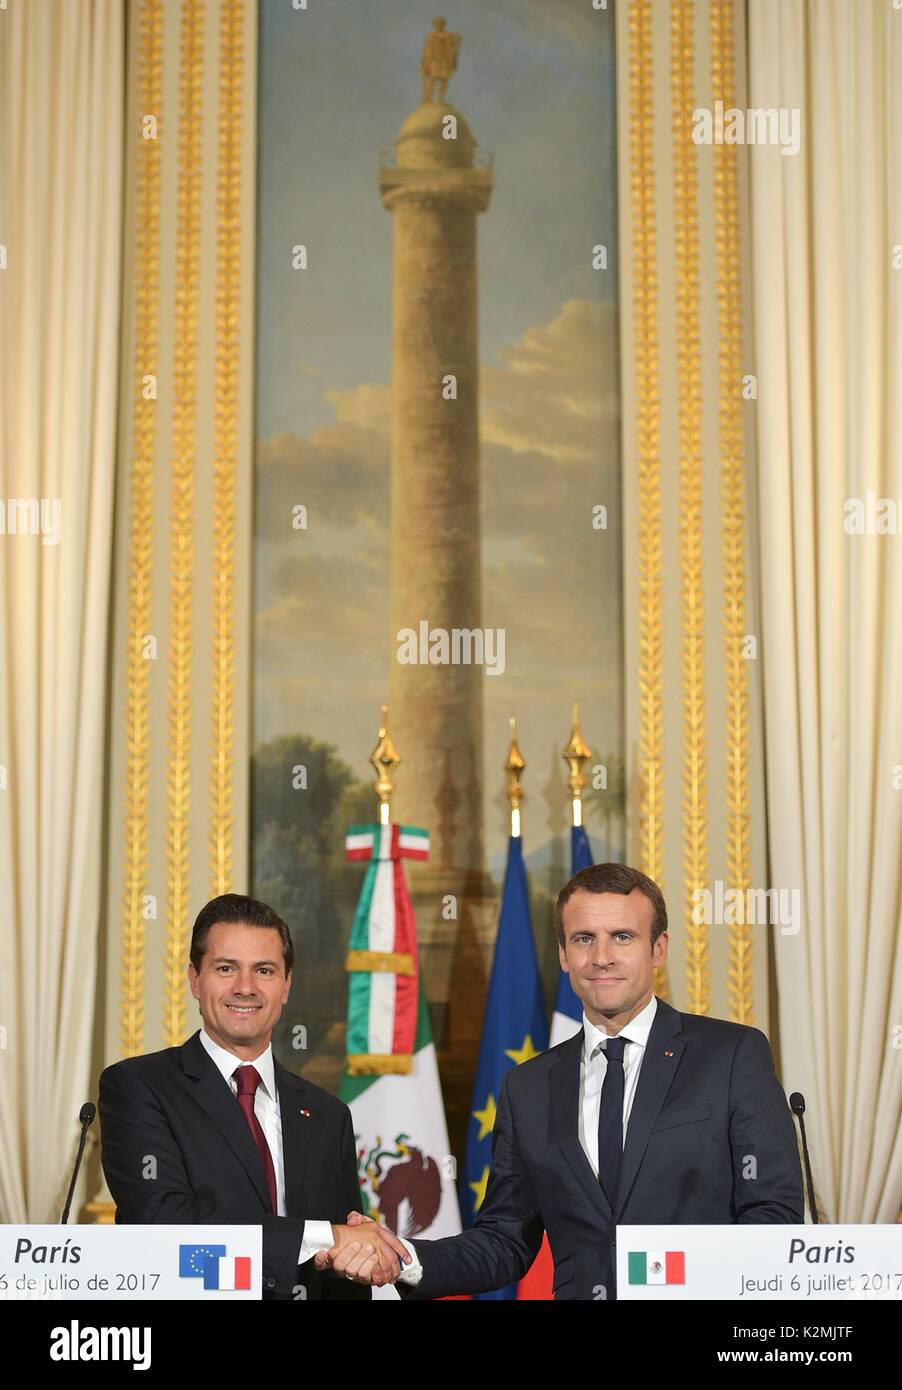 Mexican President Enrique Pena Nieto, left, during a joint press conference with French President Emmanuel Macron at the Elysee Palace July 7, 2017 in Paris, France. Stock Photo